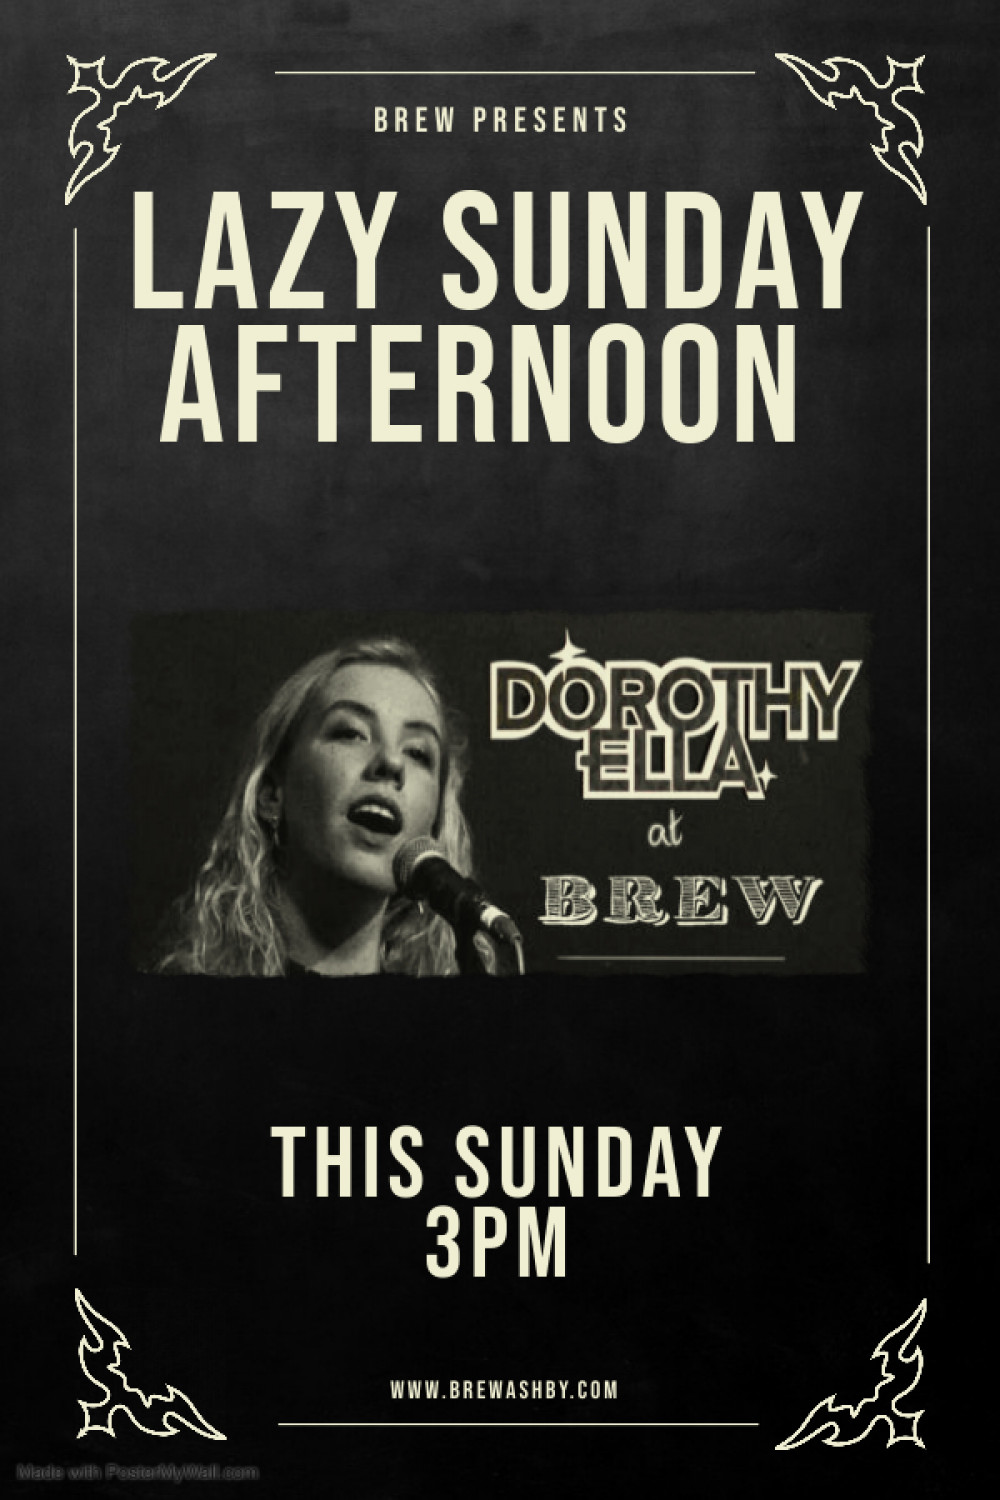 Lazy Sunday Afternoon Acoustic Session with Dorothy Ella at Brew in Ashby de la Zouch